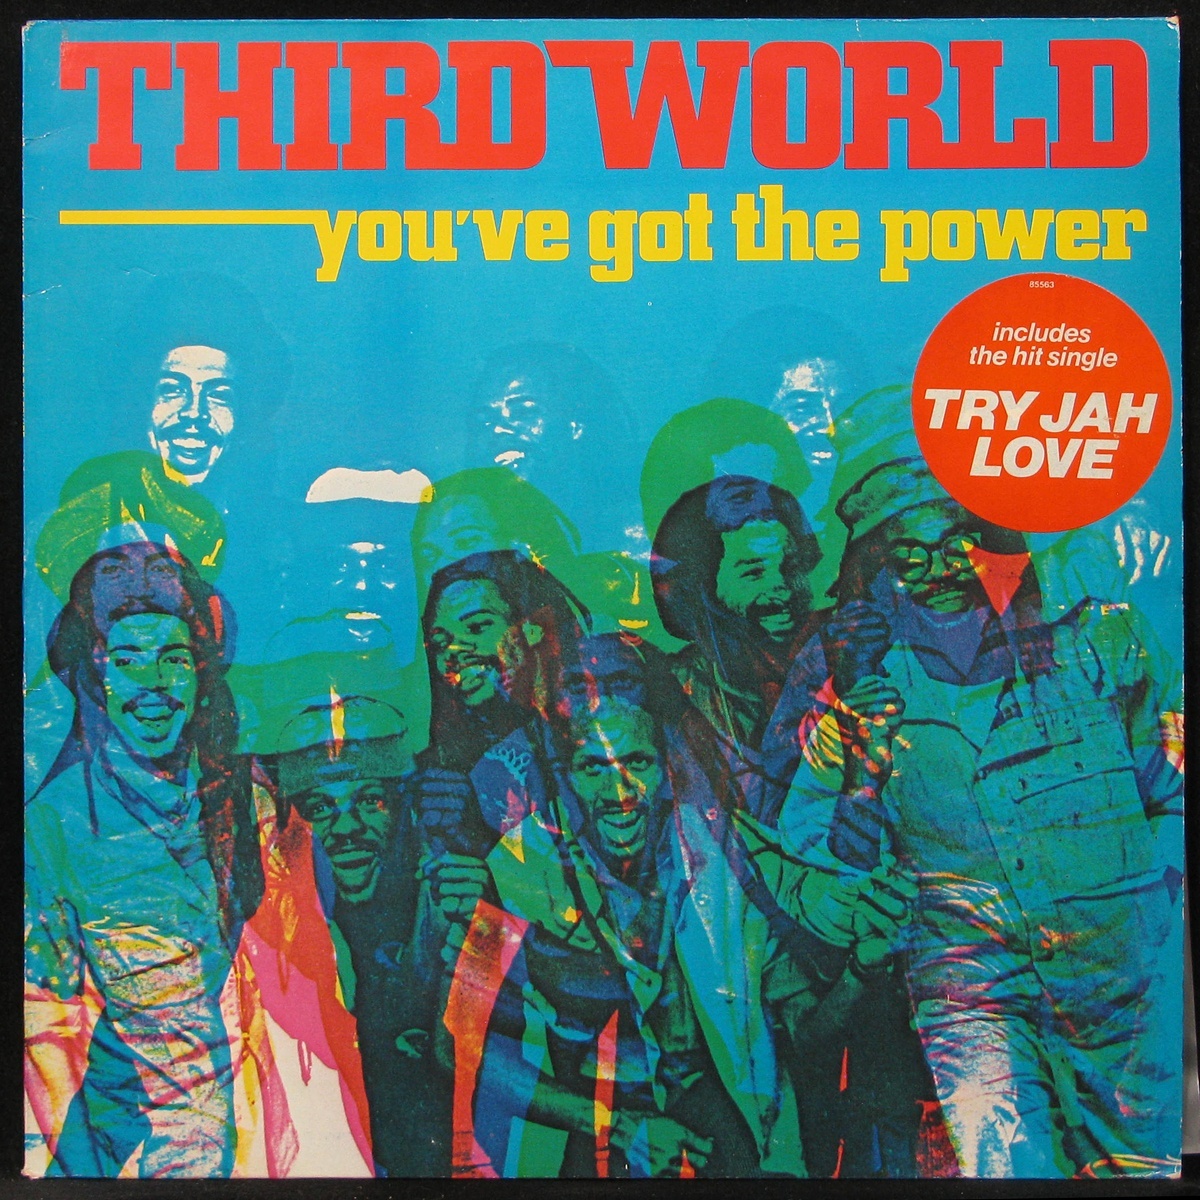 Third world is. LP the Power. You World.